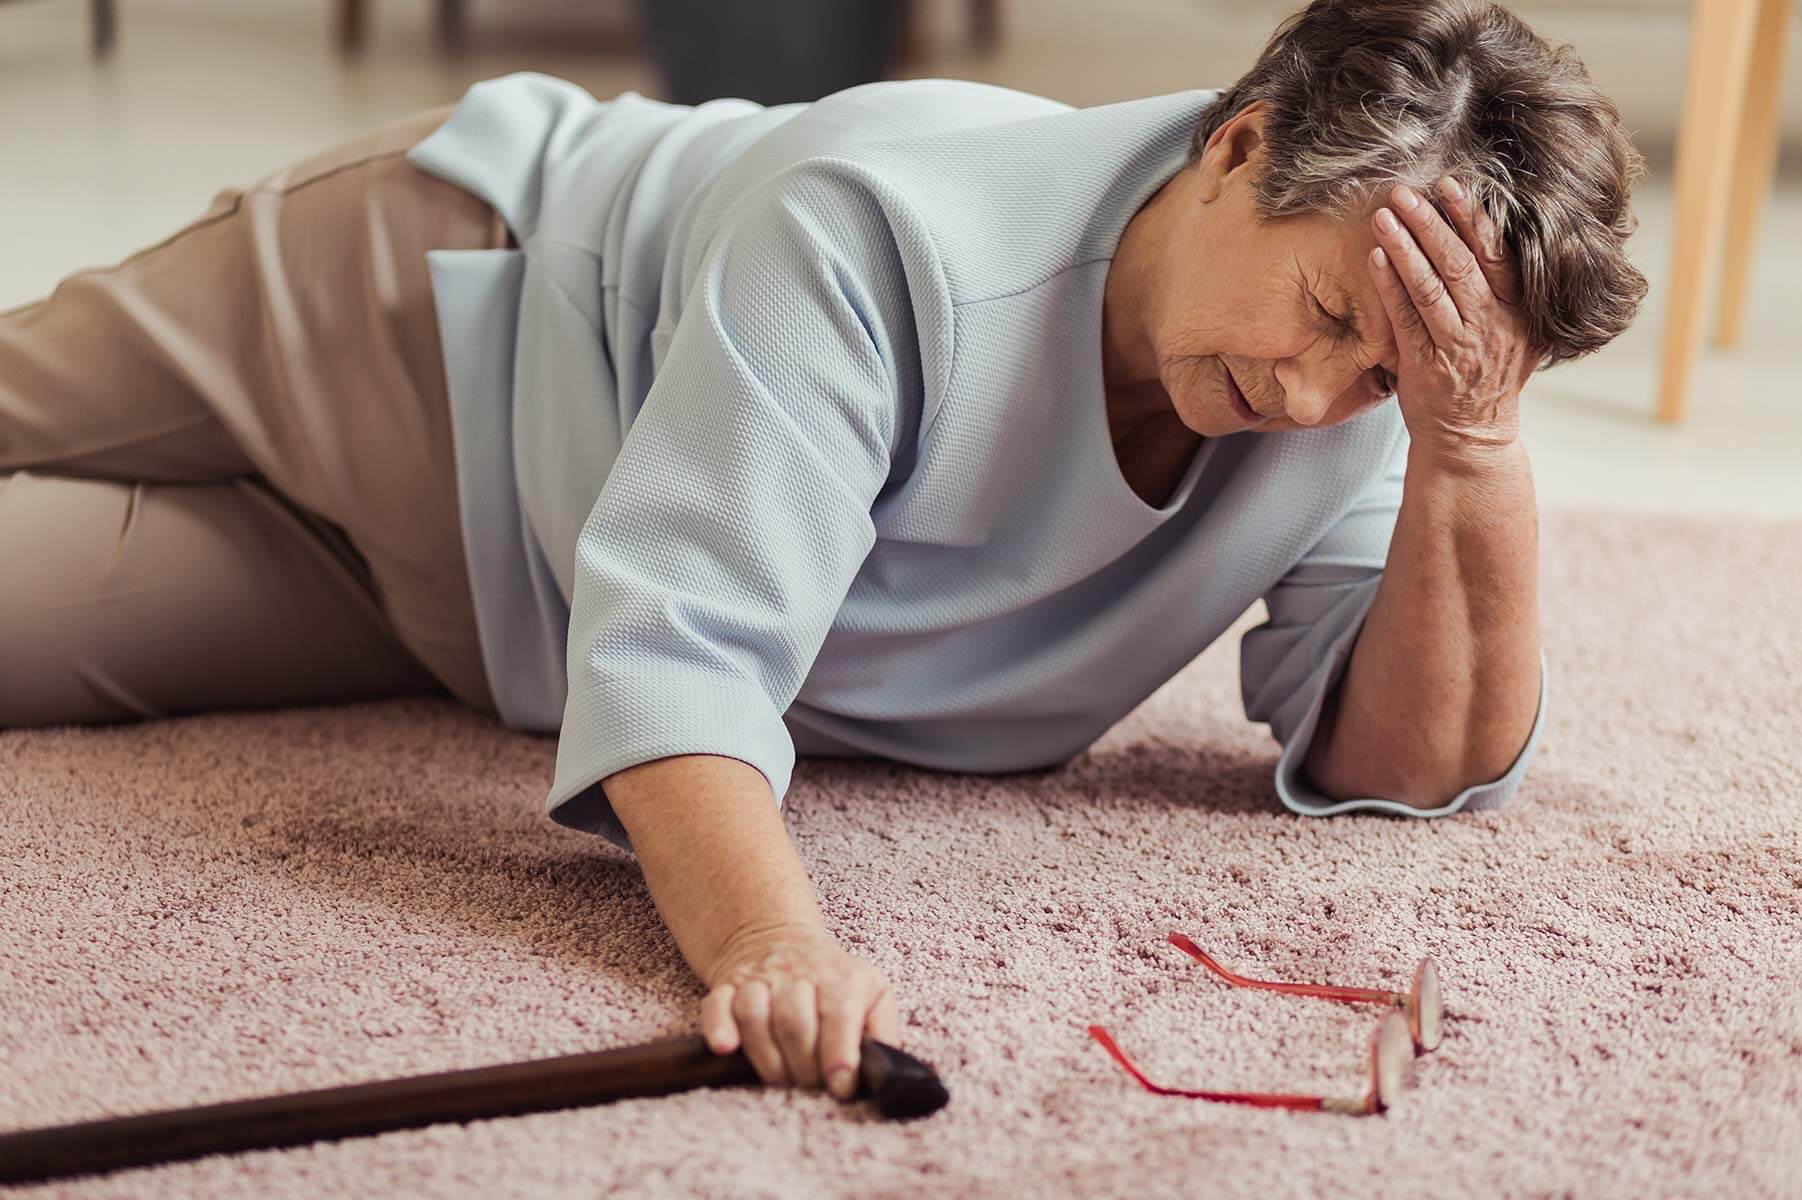 Falls Prevention and Physical Therapy: What You Need to Know